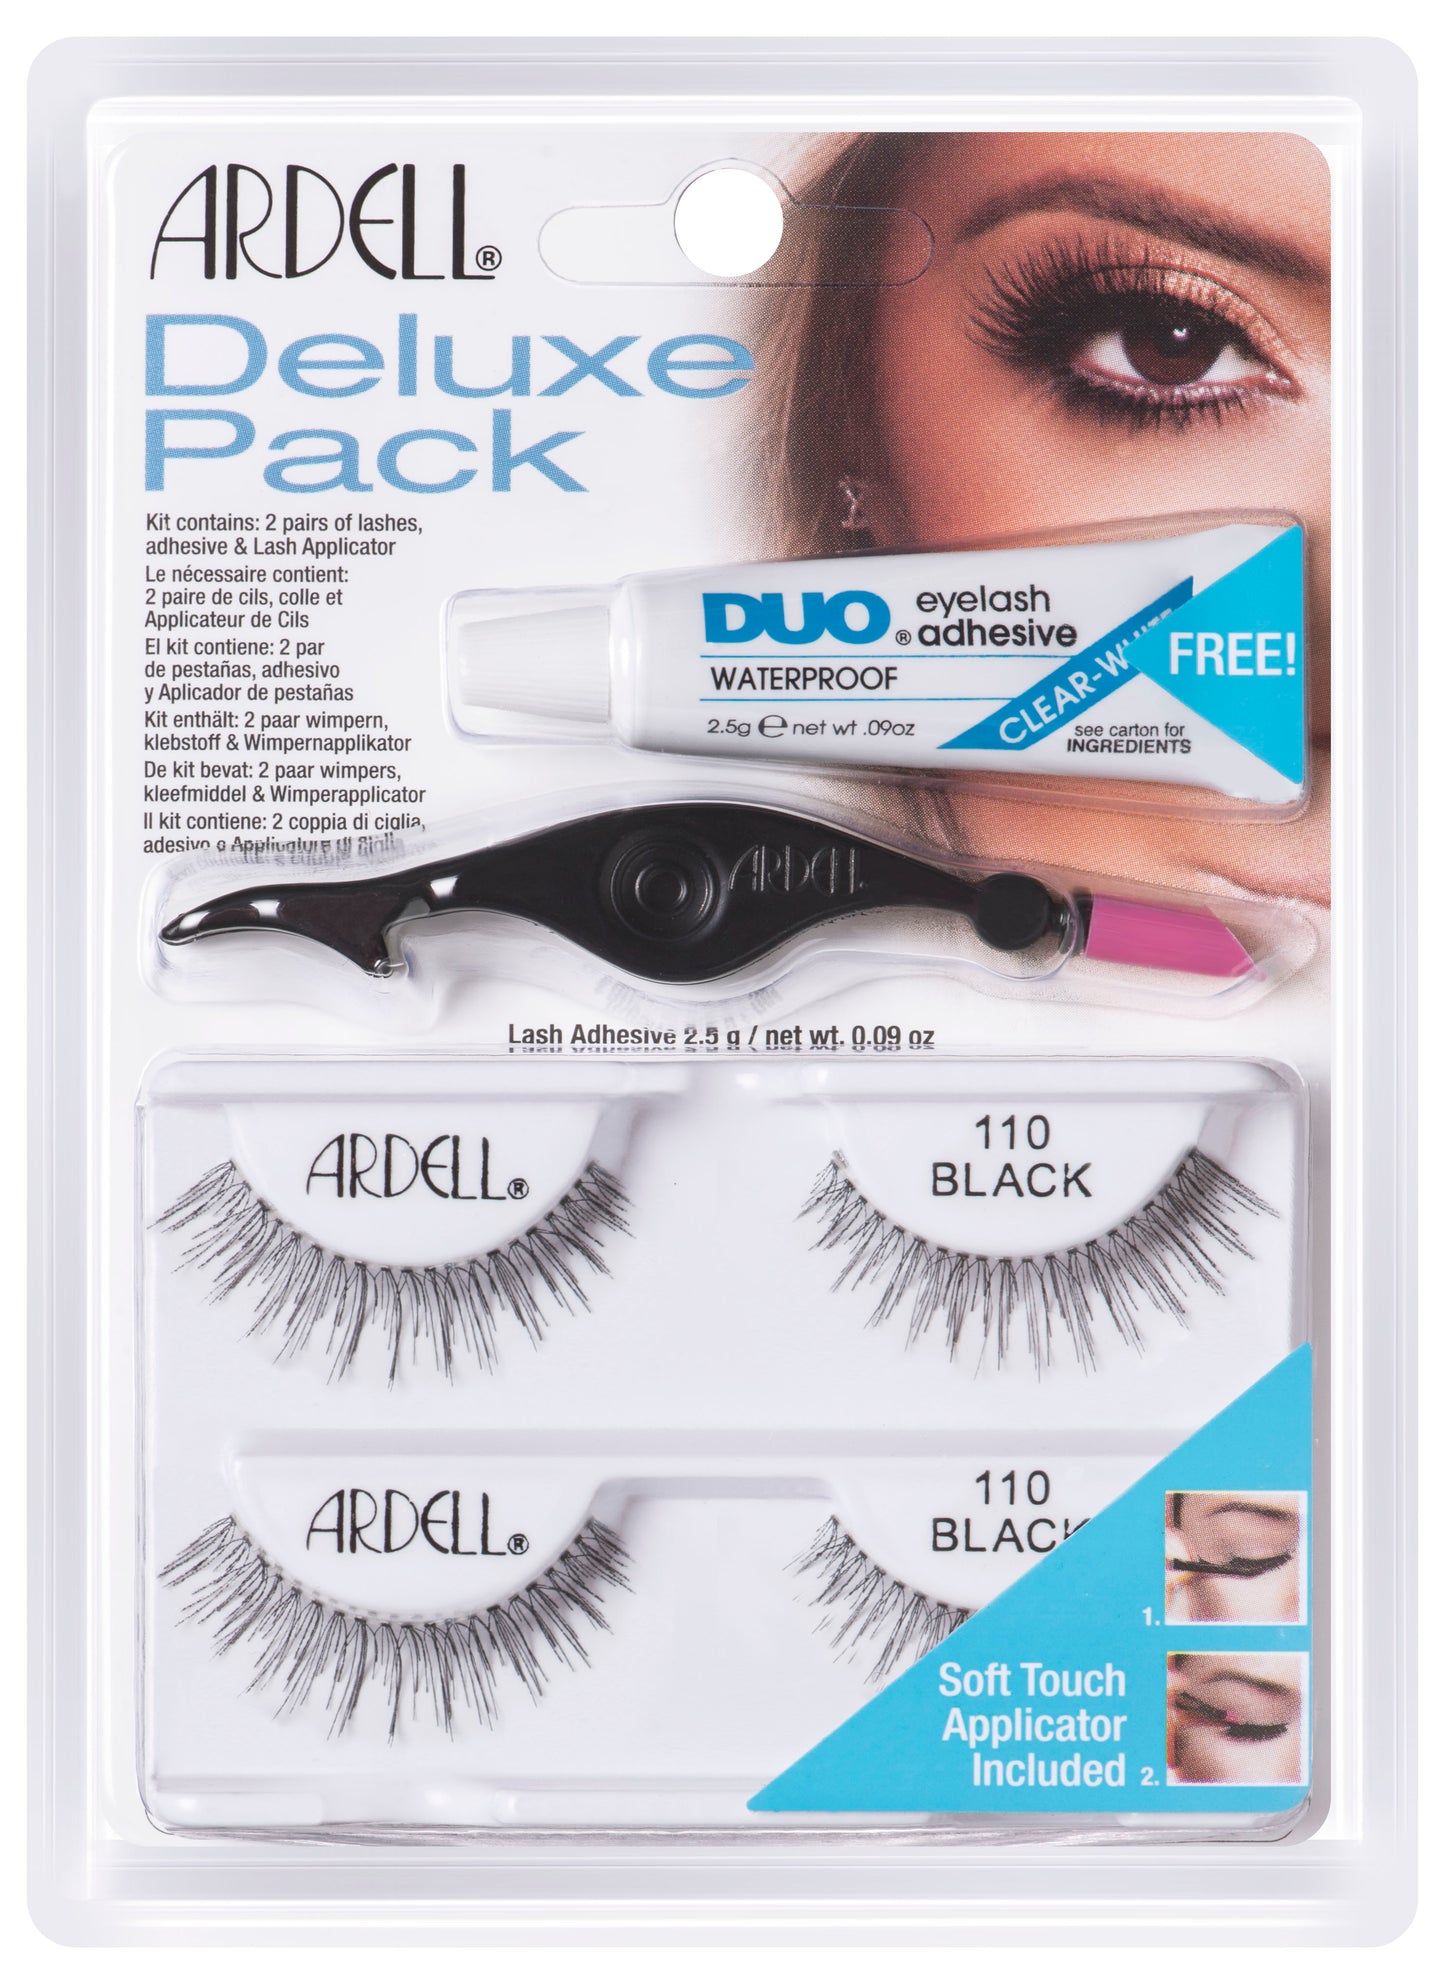 Set of Ardell Deluxe Pack contains two pairs of 110 lashes, DUO adhesive & soft-touch applicator inside its retail packaging